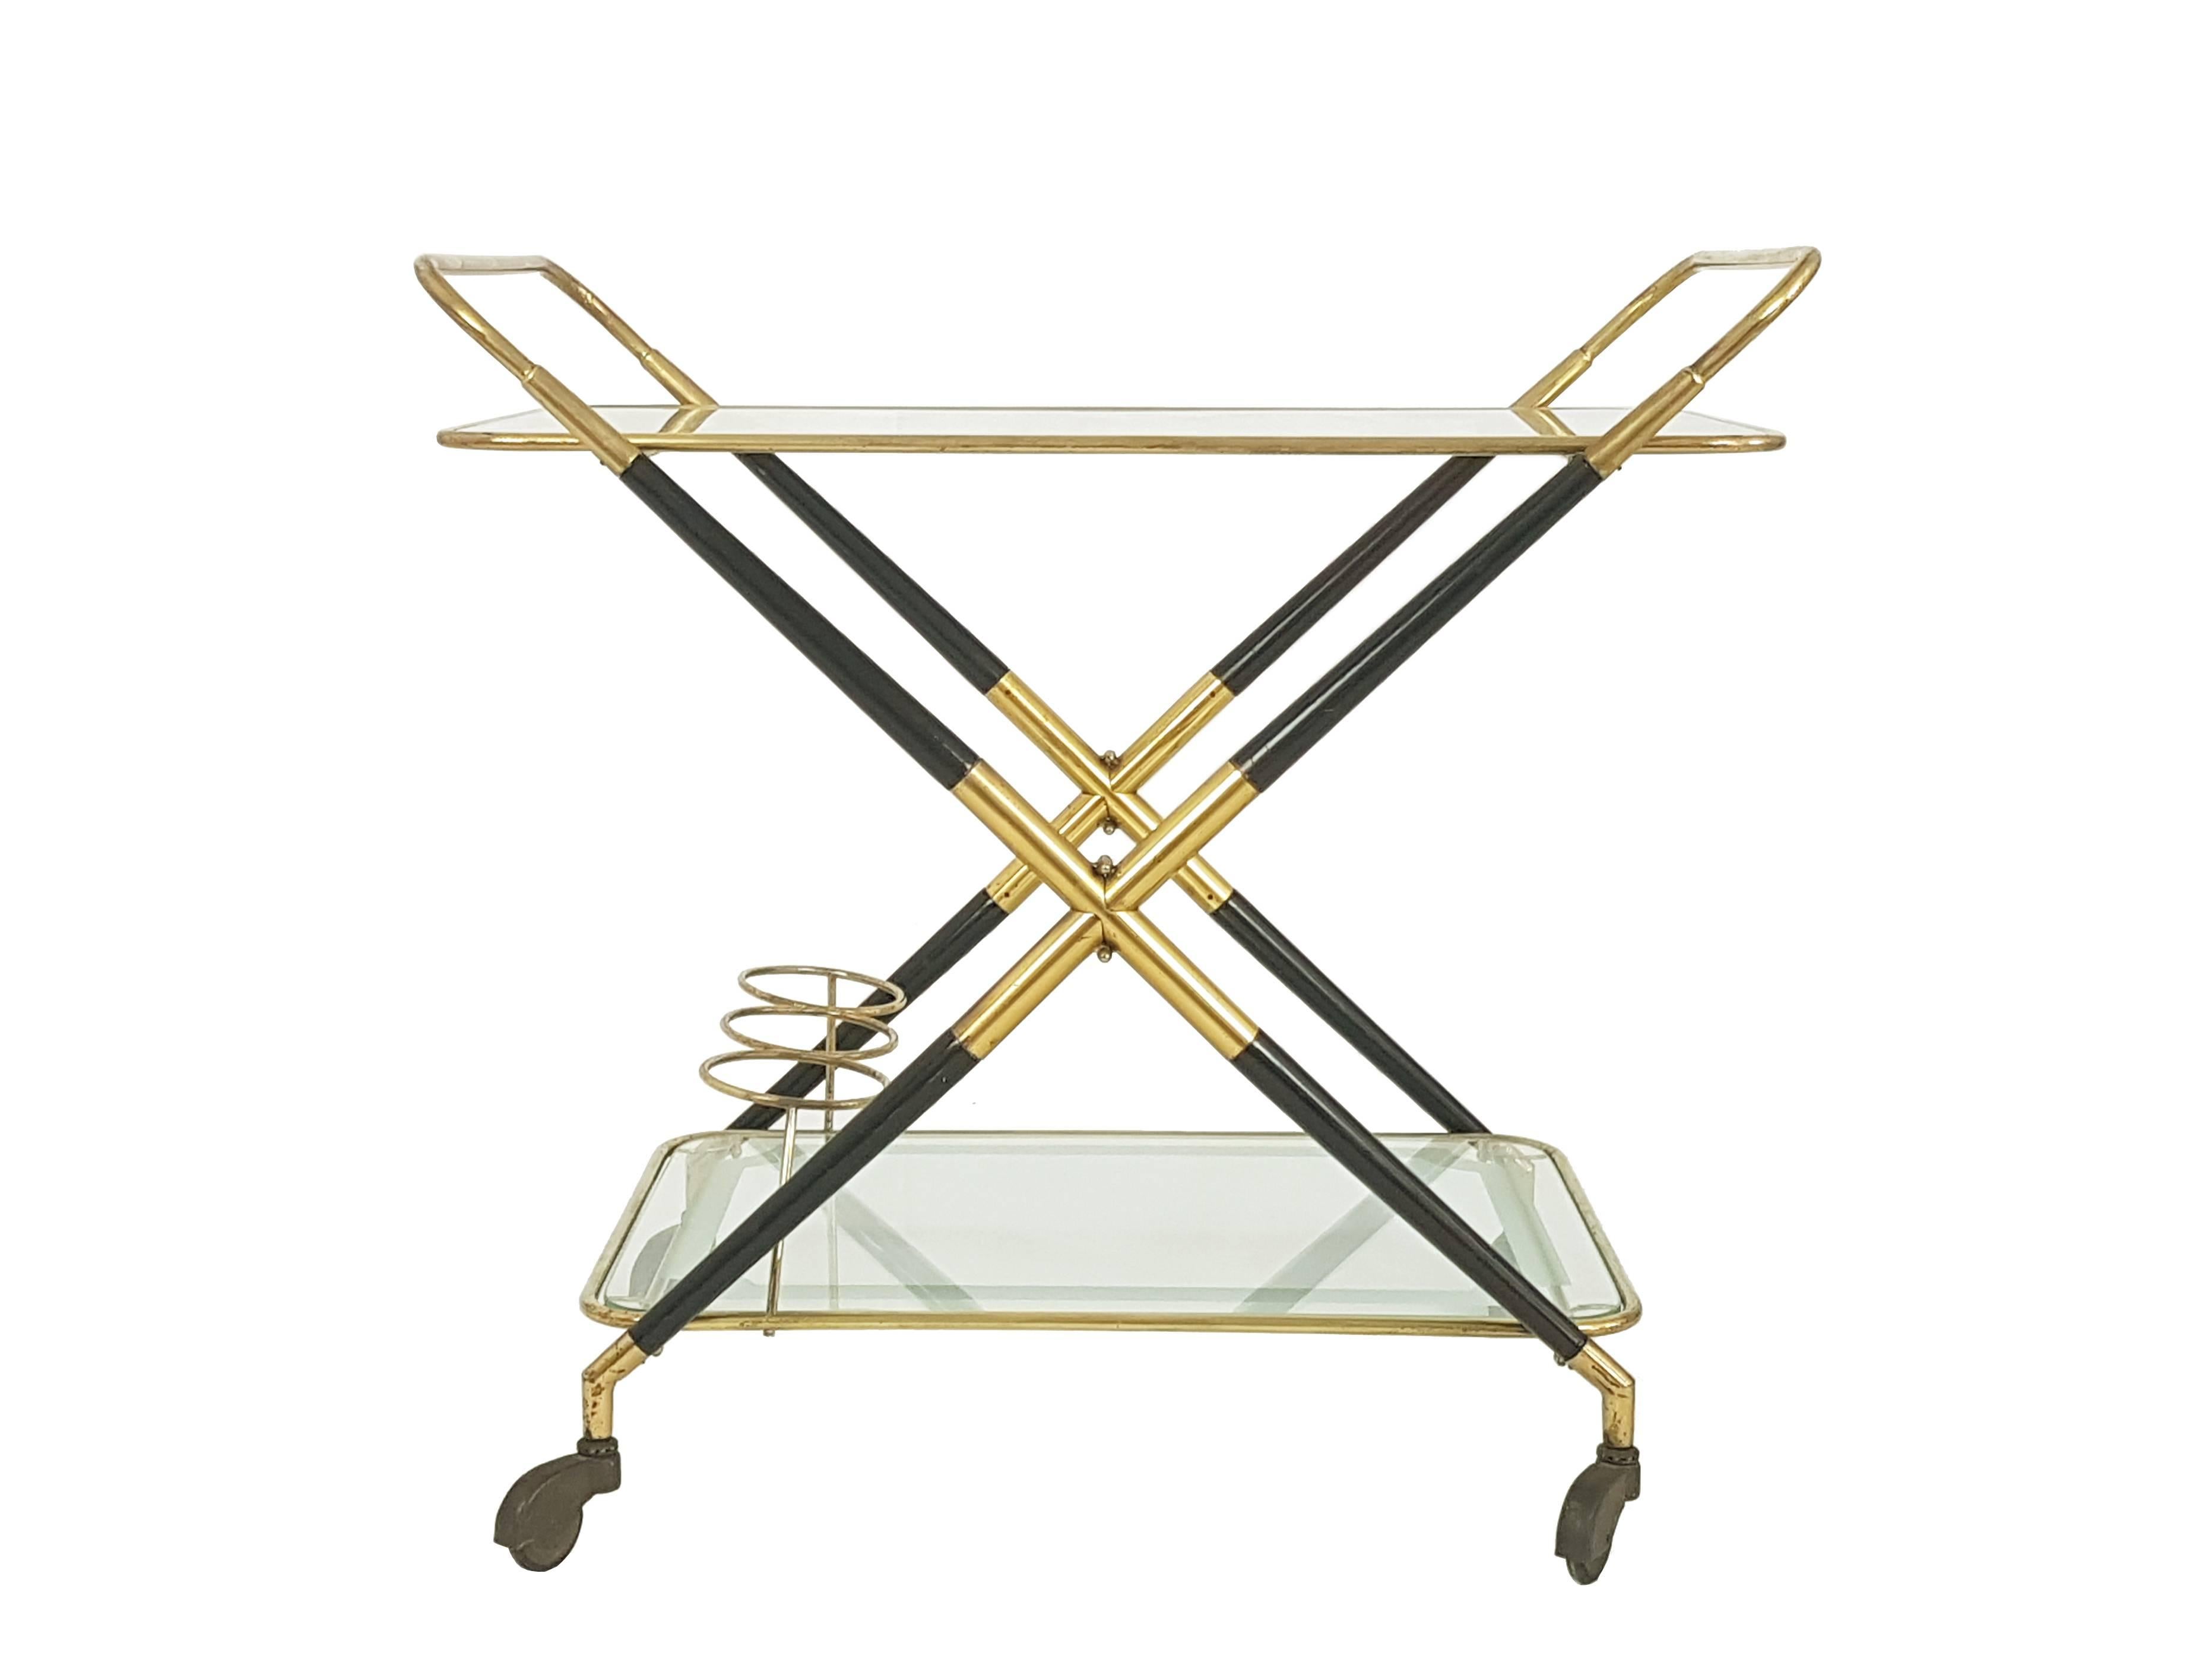 This serving trolley is made from a brass and laquered wood structure, supporting two removable glass shelves with brass edging. All sitting on brass and rubber wheels. Thanks to its useful brass joint the serving cart can be folded. Each glass